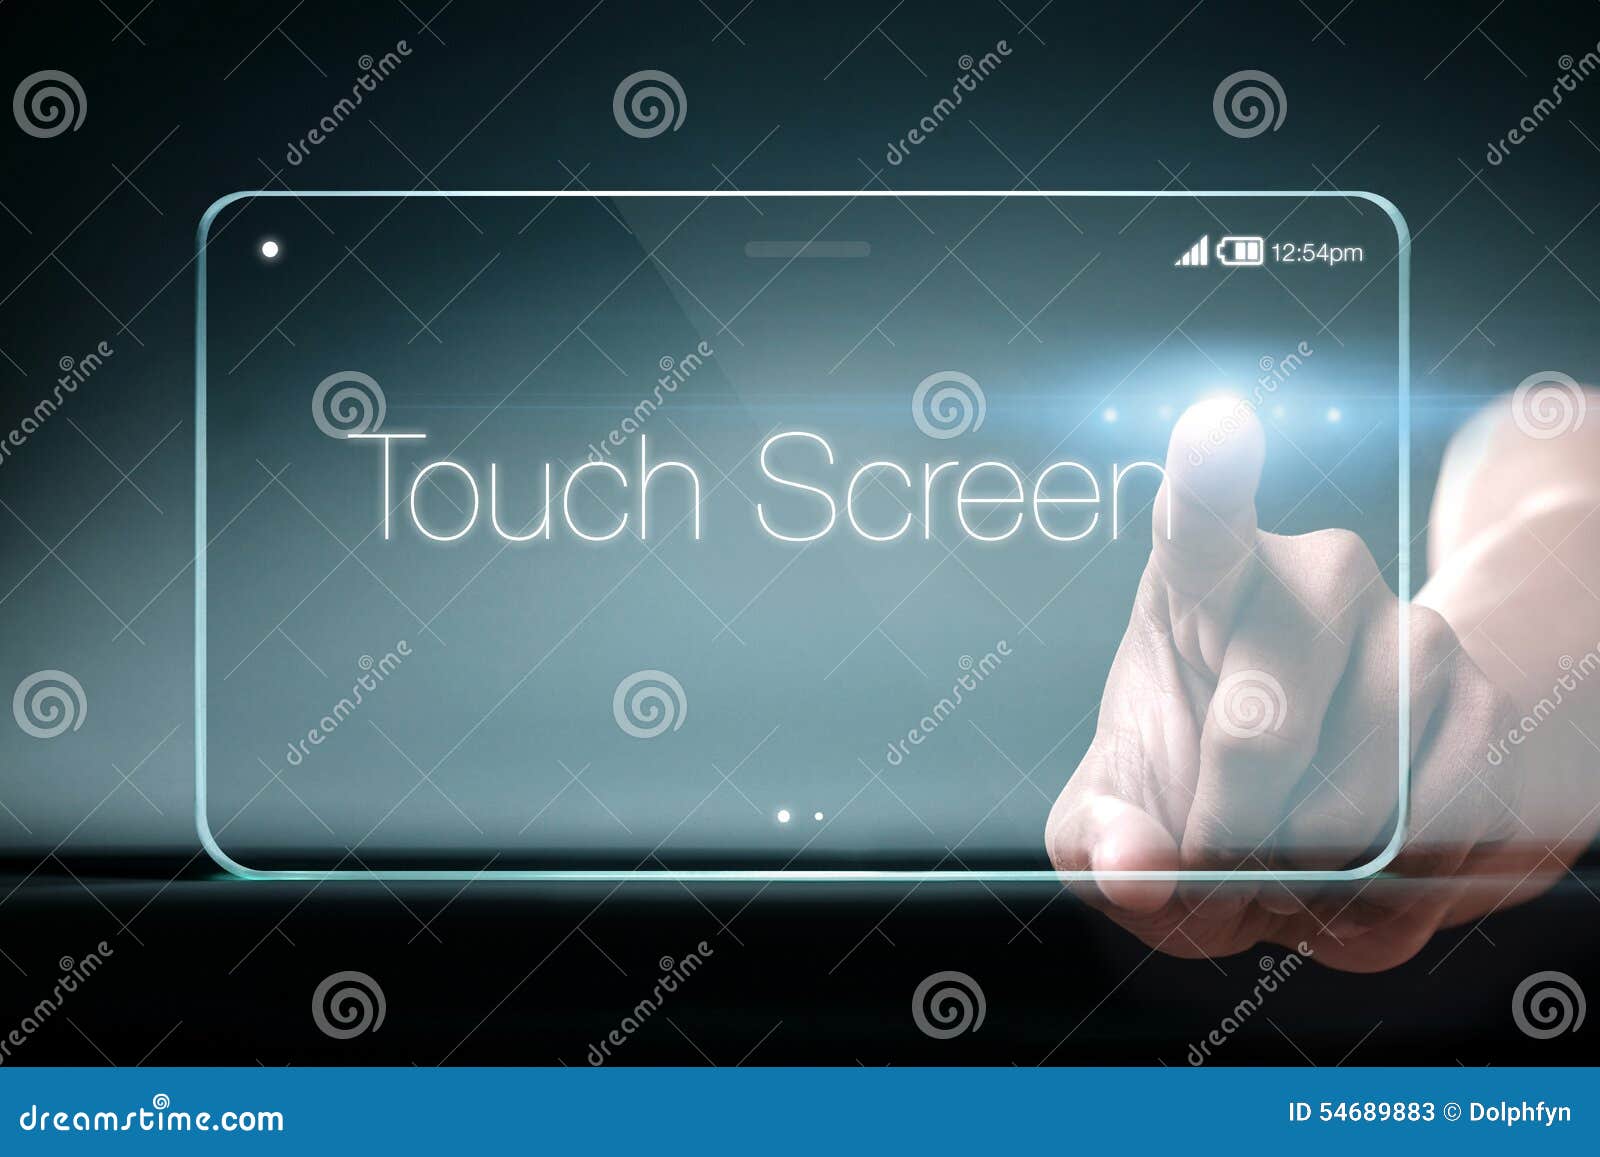 Steam on touch screen фото 86